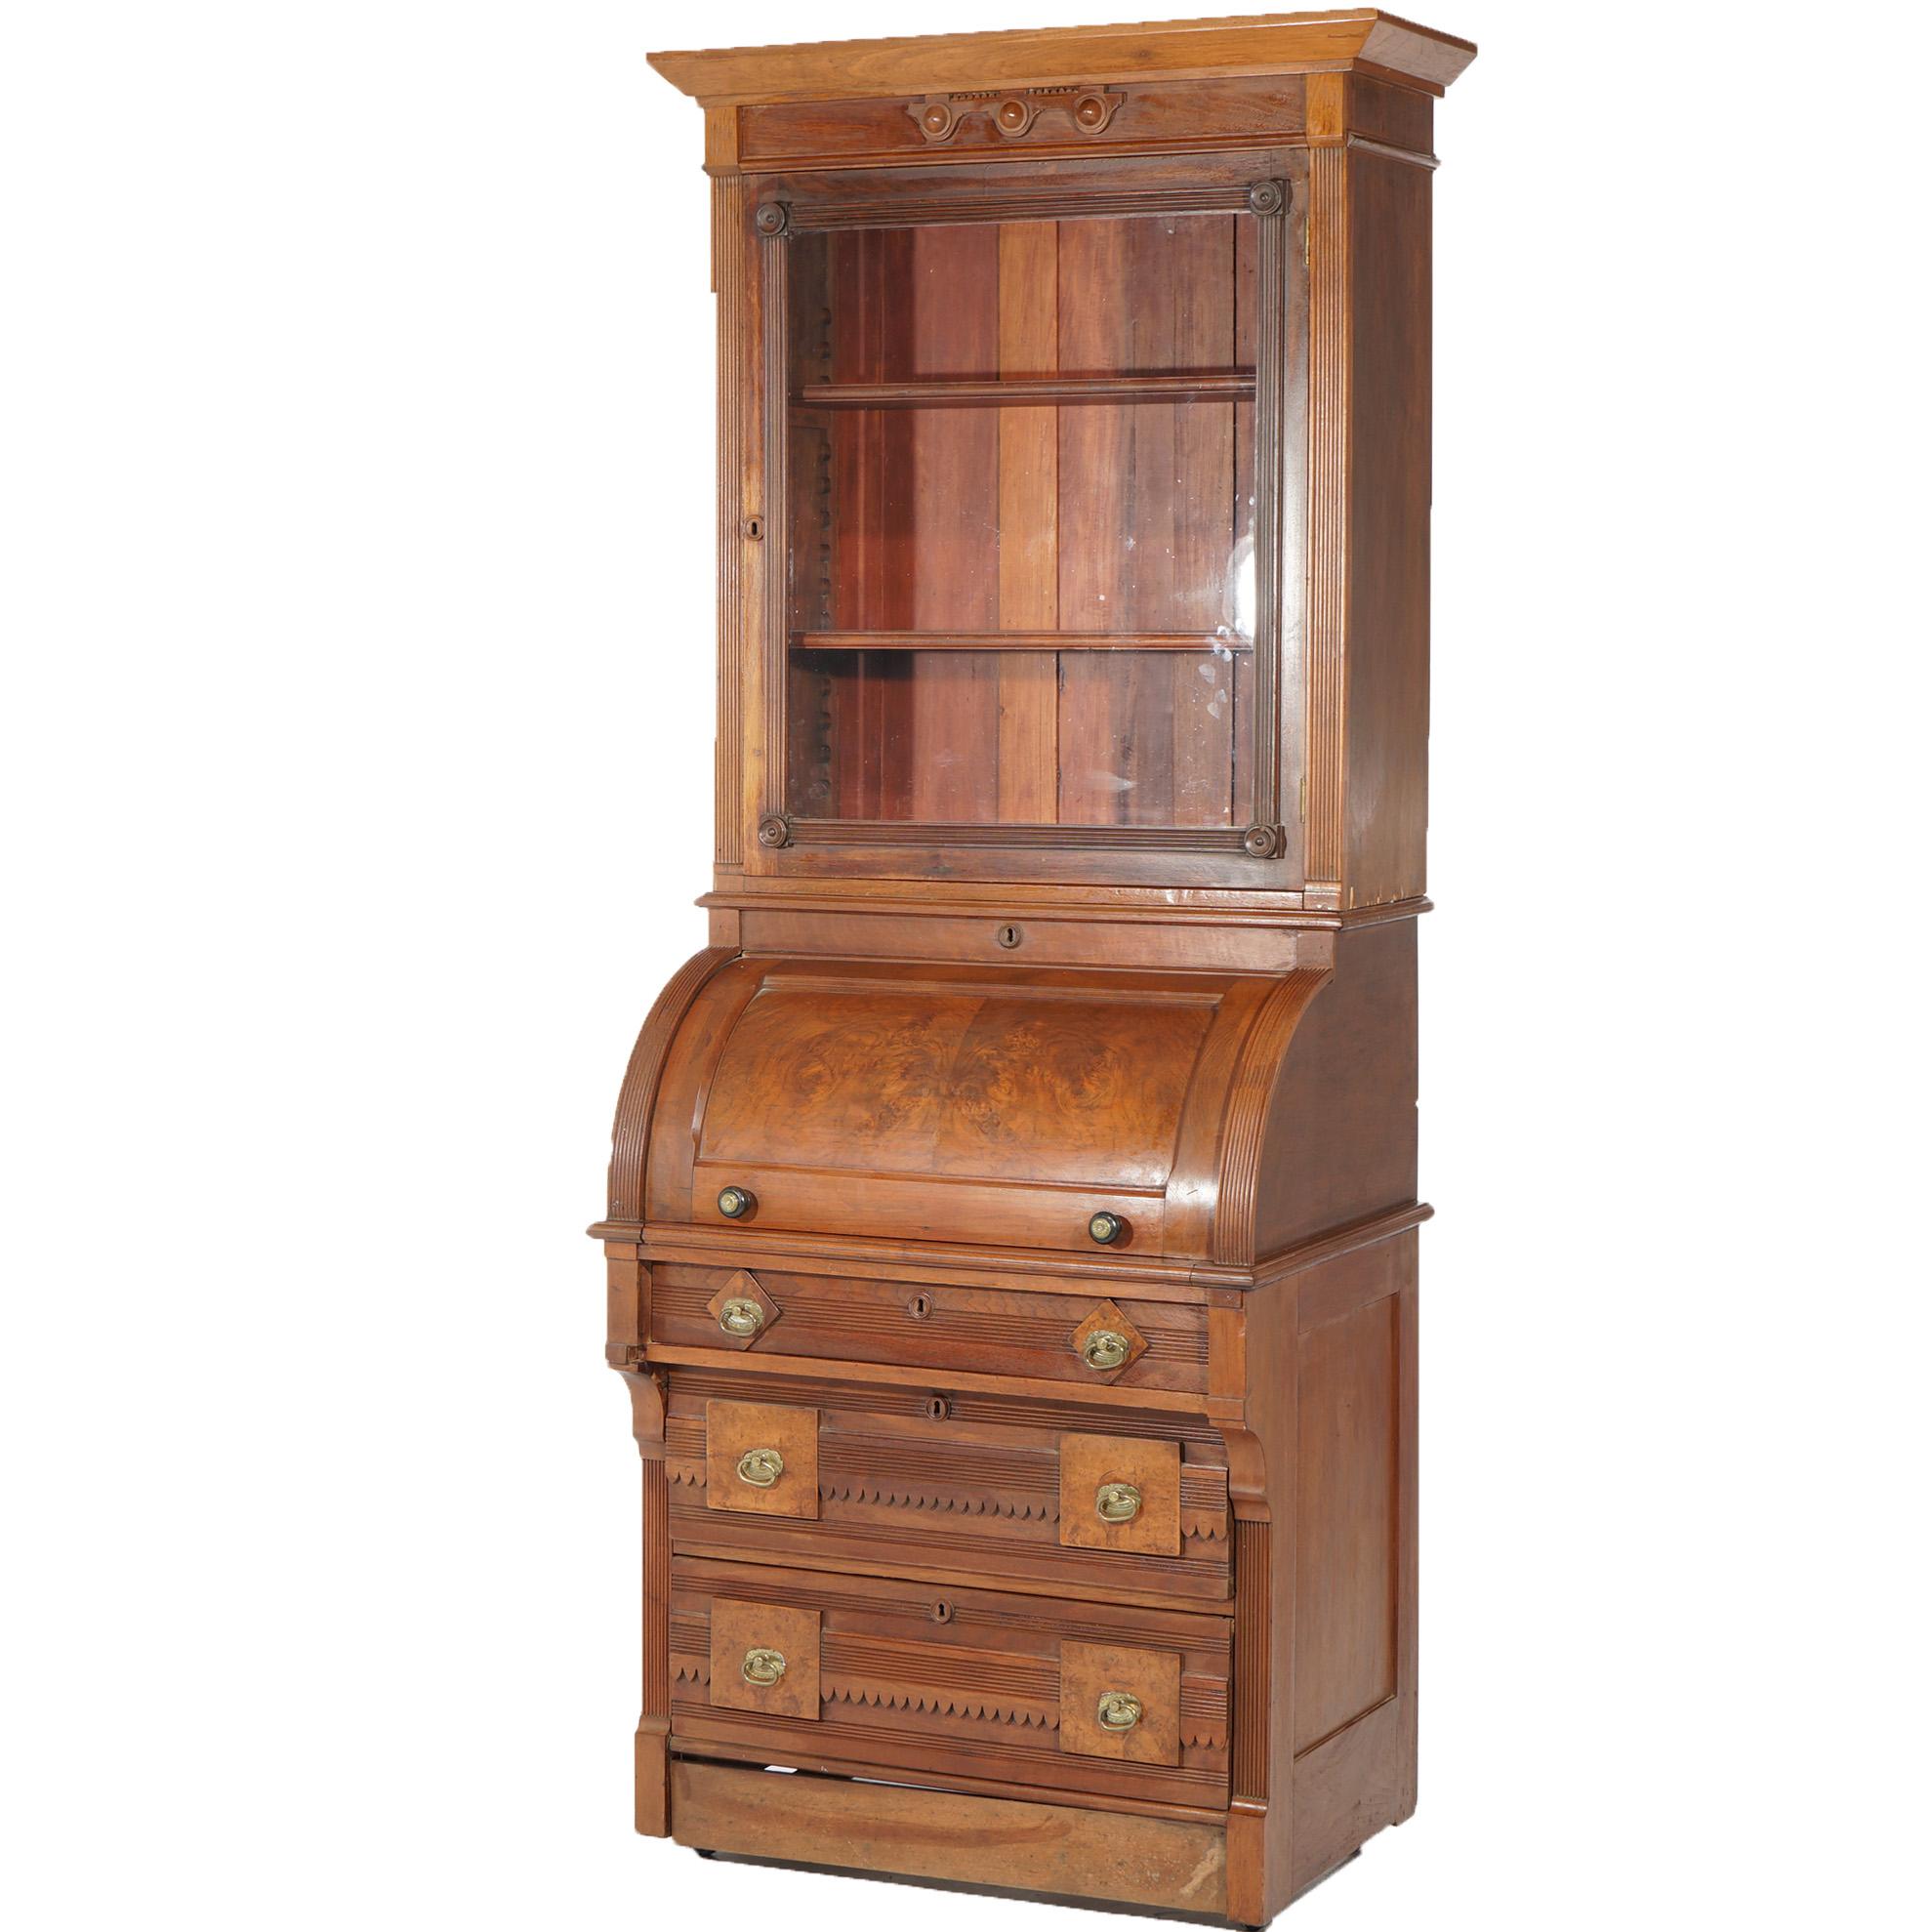 An antique Renaissance Revival secretary offers walnut and burl construction having upper bookcase with single glass door opening to shelved interior over barrel roll top desk with lower drawers, c1890

Measures - 83